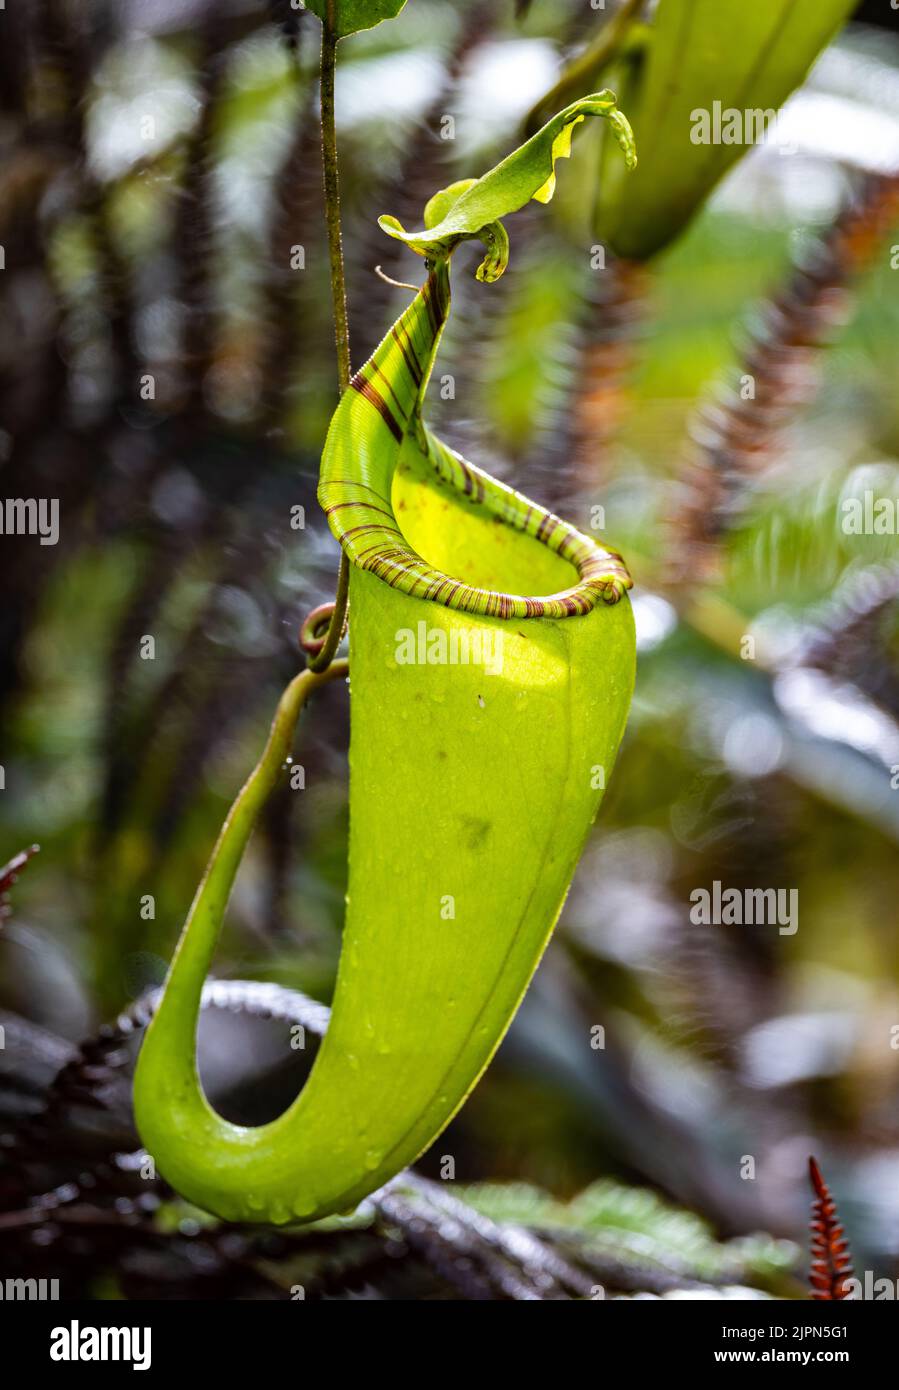 Carnivorous Pitcher plant Nepenthes in the wild. Lore Lindu National Park, Sulawesi, Indonesia. Stock Photo